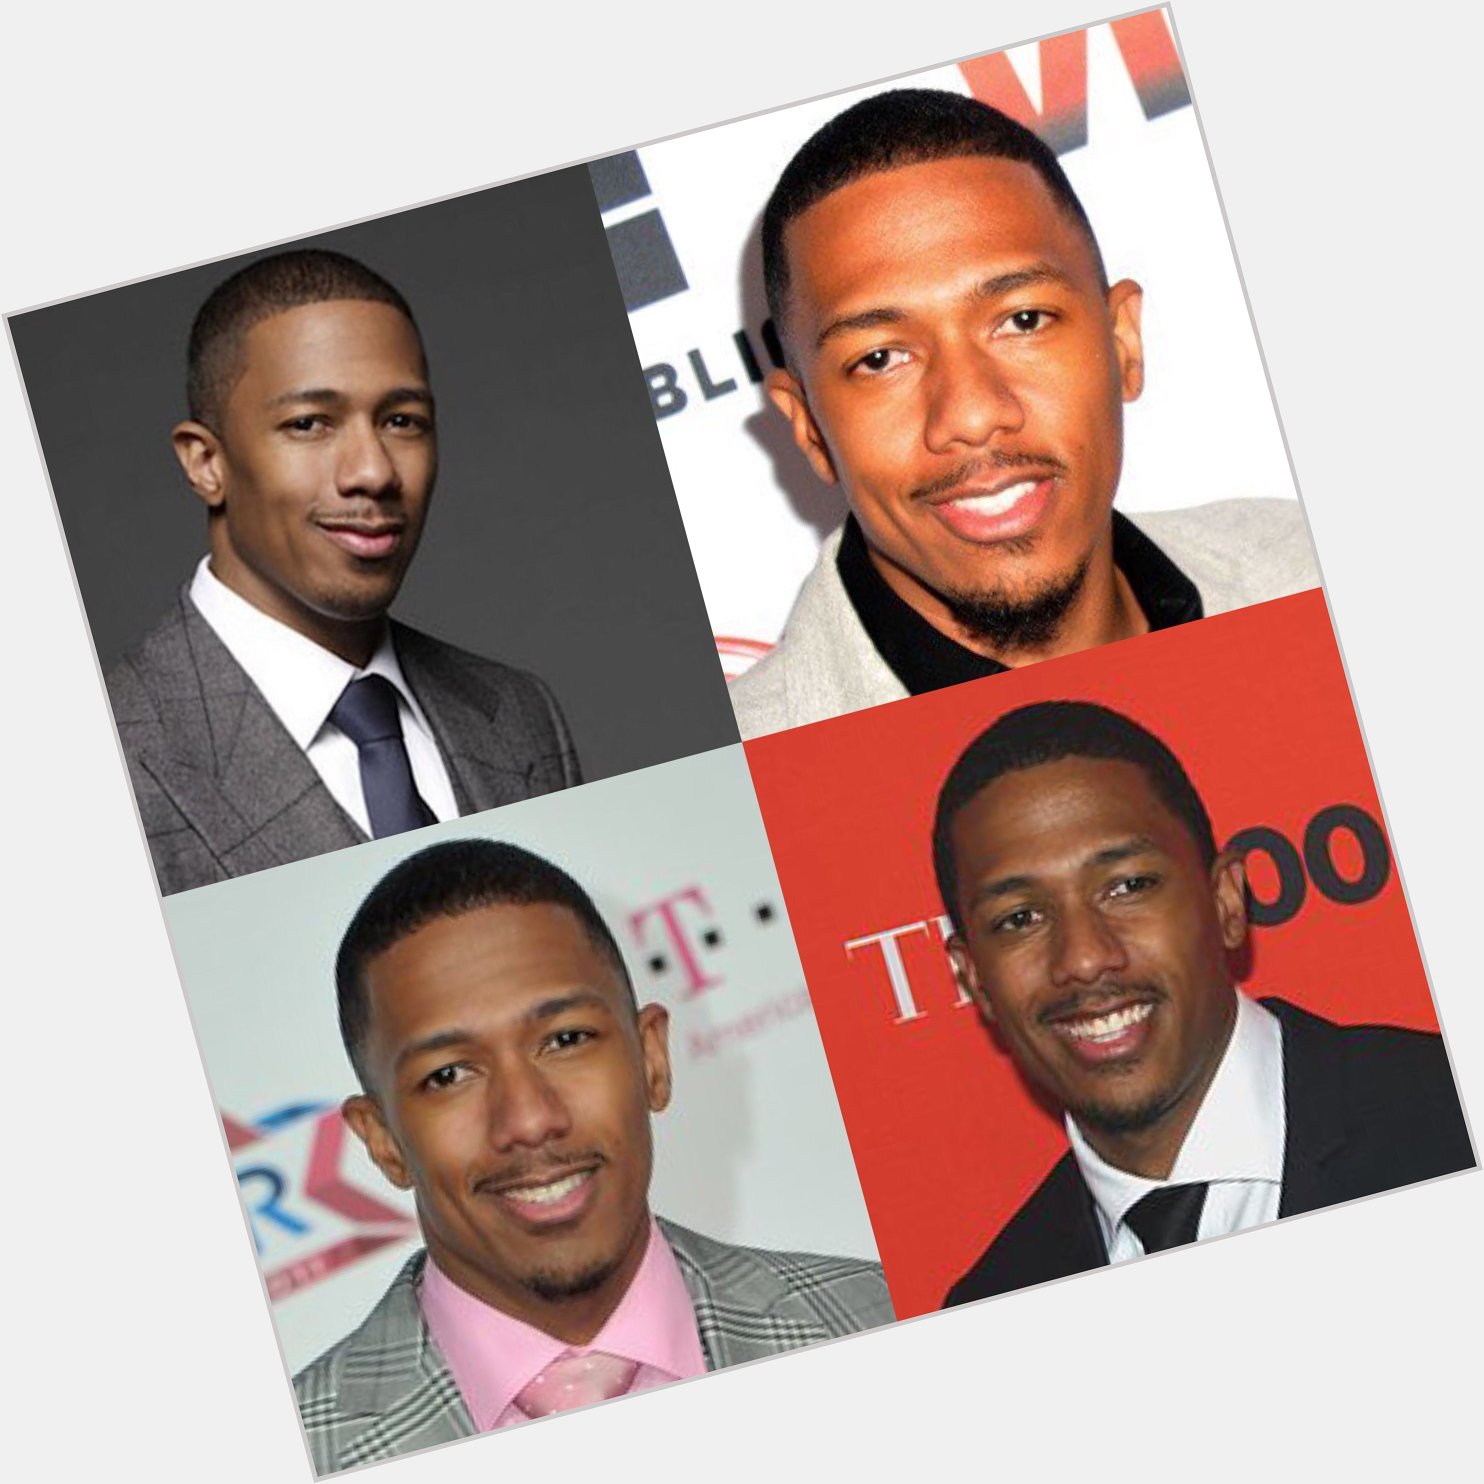 Happy 37 birthday to nick  Cannon. Hope that he has a wonderful birthday.     